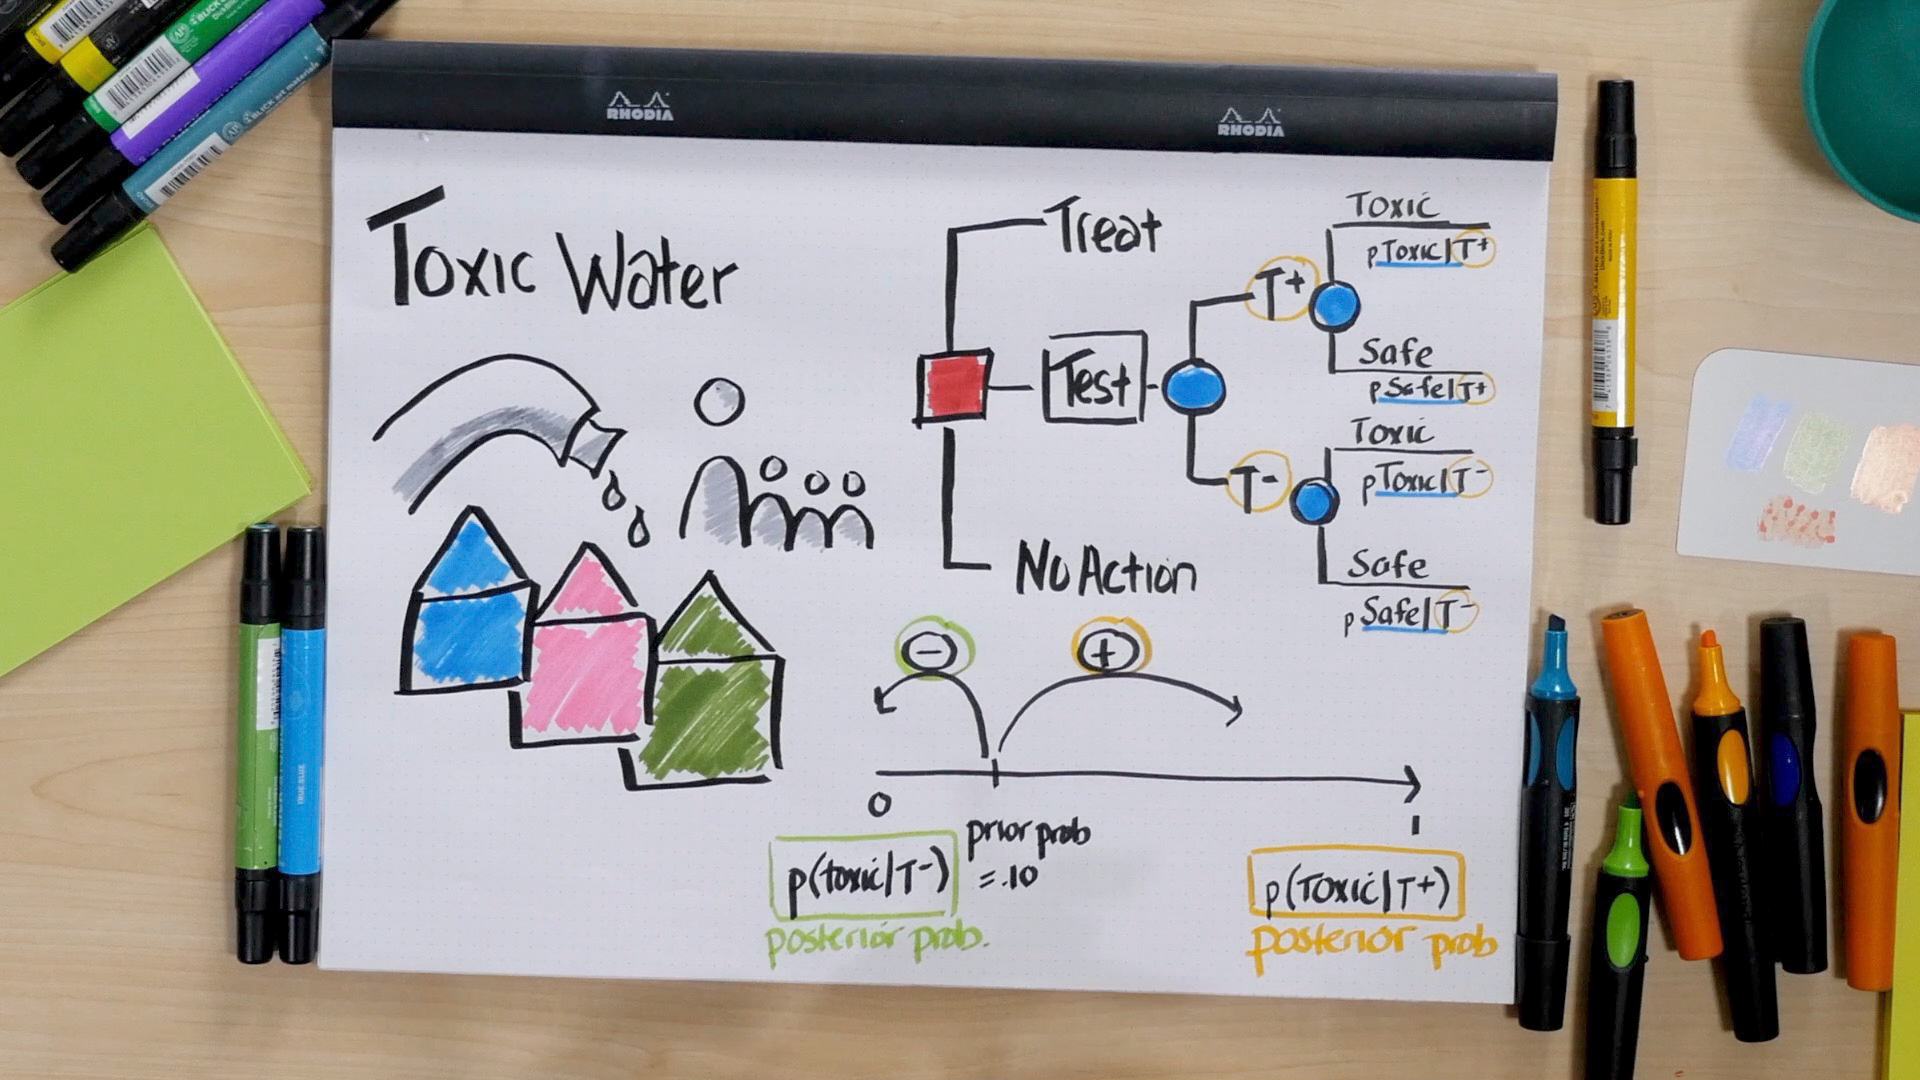 Drawing on table with colorful markers showing a decision tree about Toxic Water